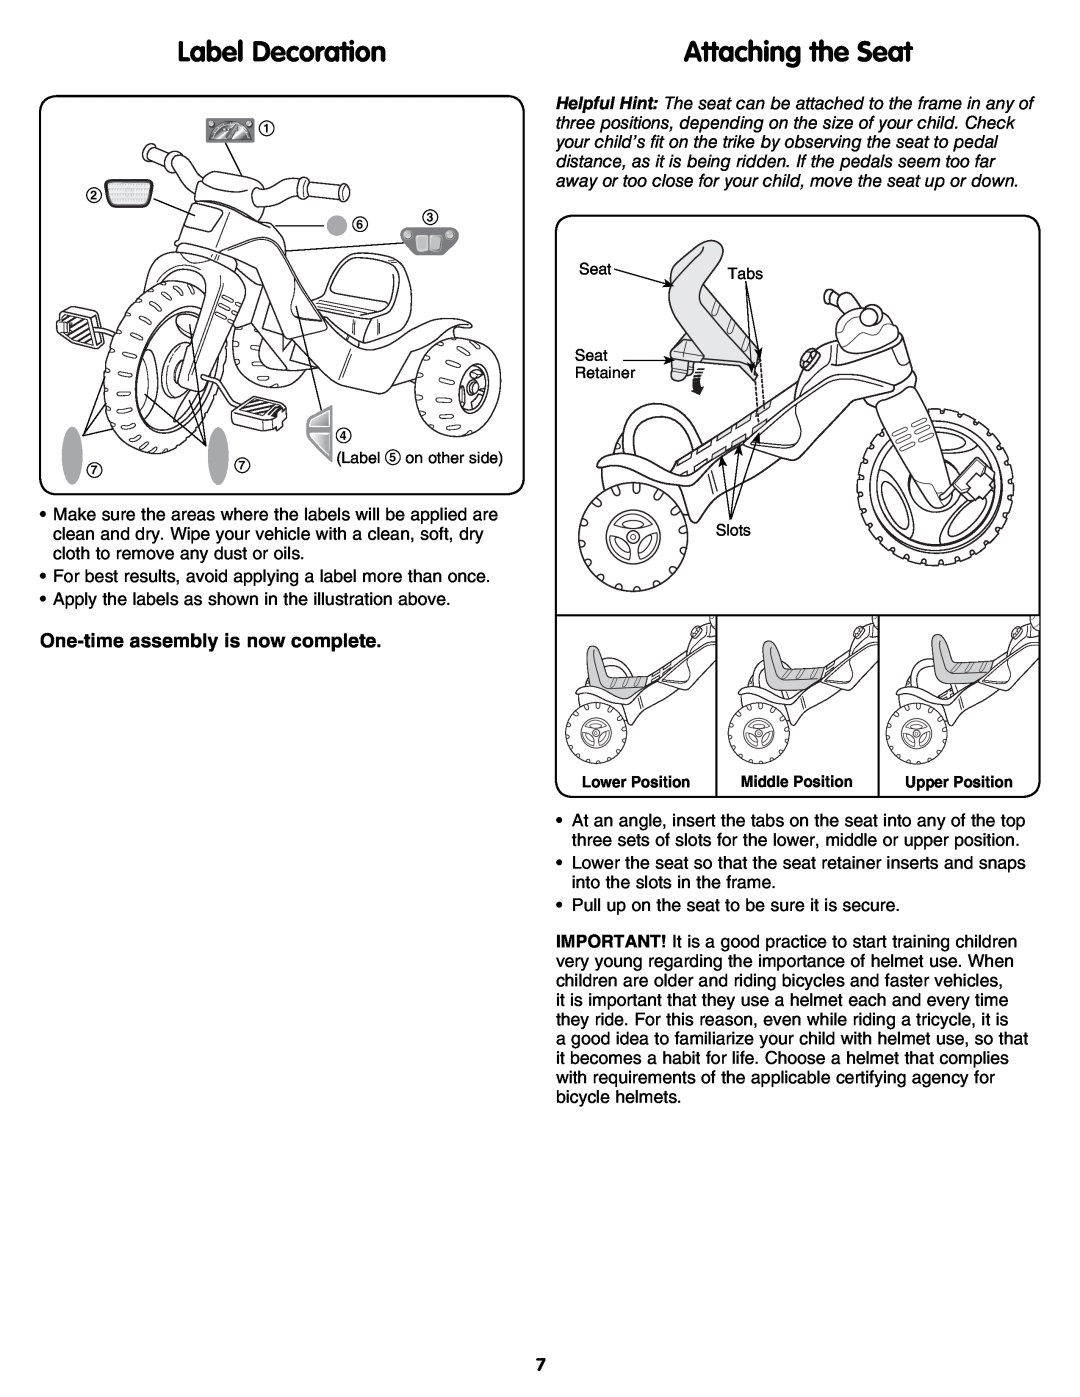 Fisher-Price M7332 manual Label Decoration, Attaching the Seat, One-time assembly is now complete 